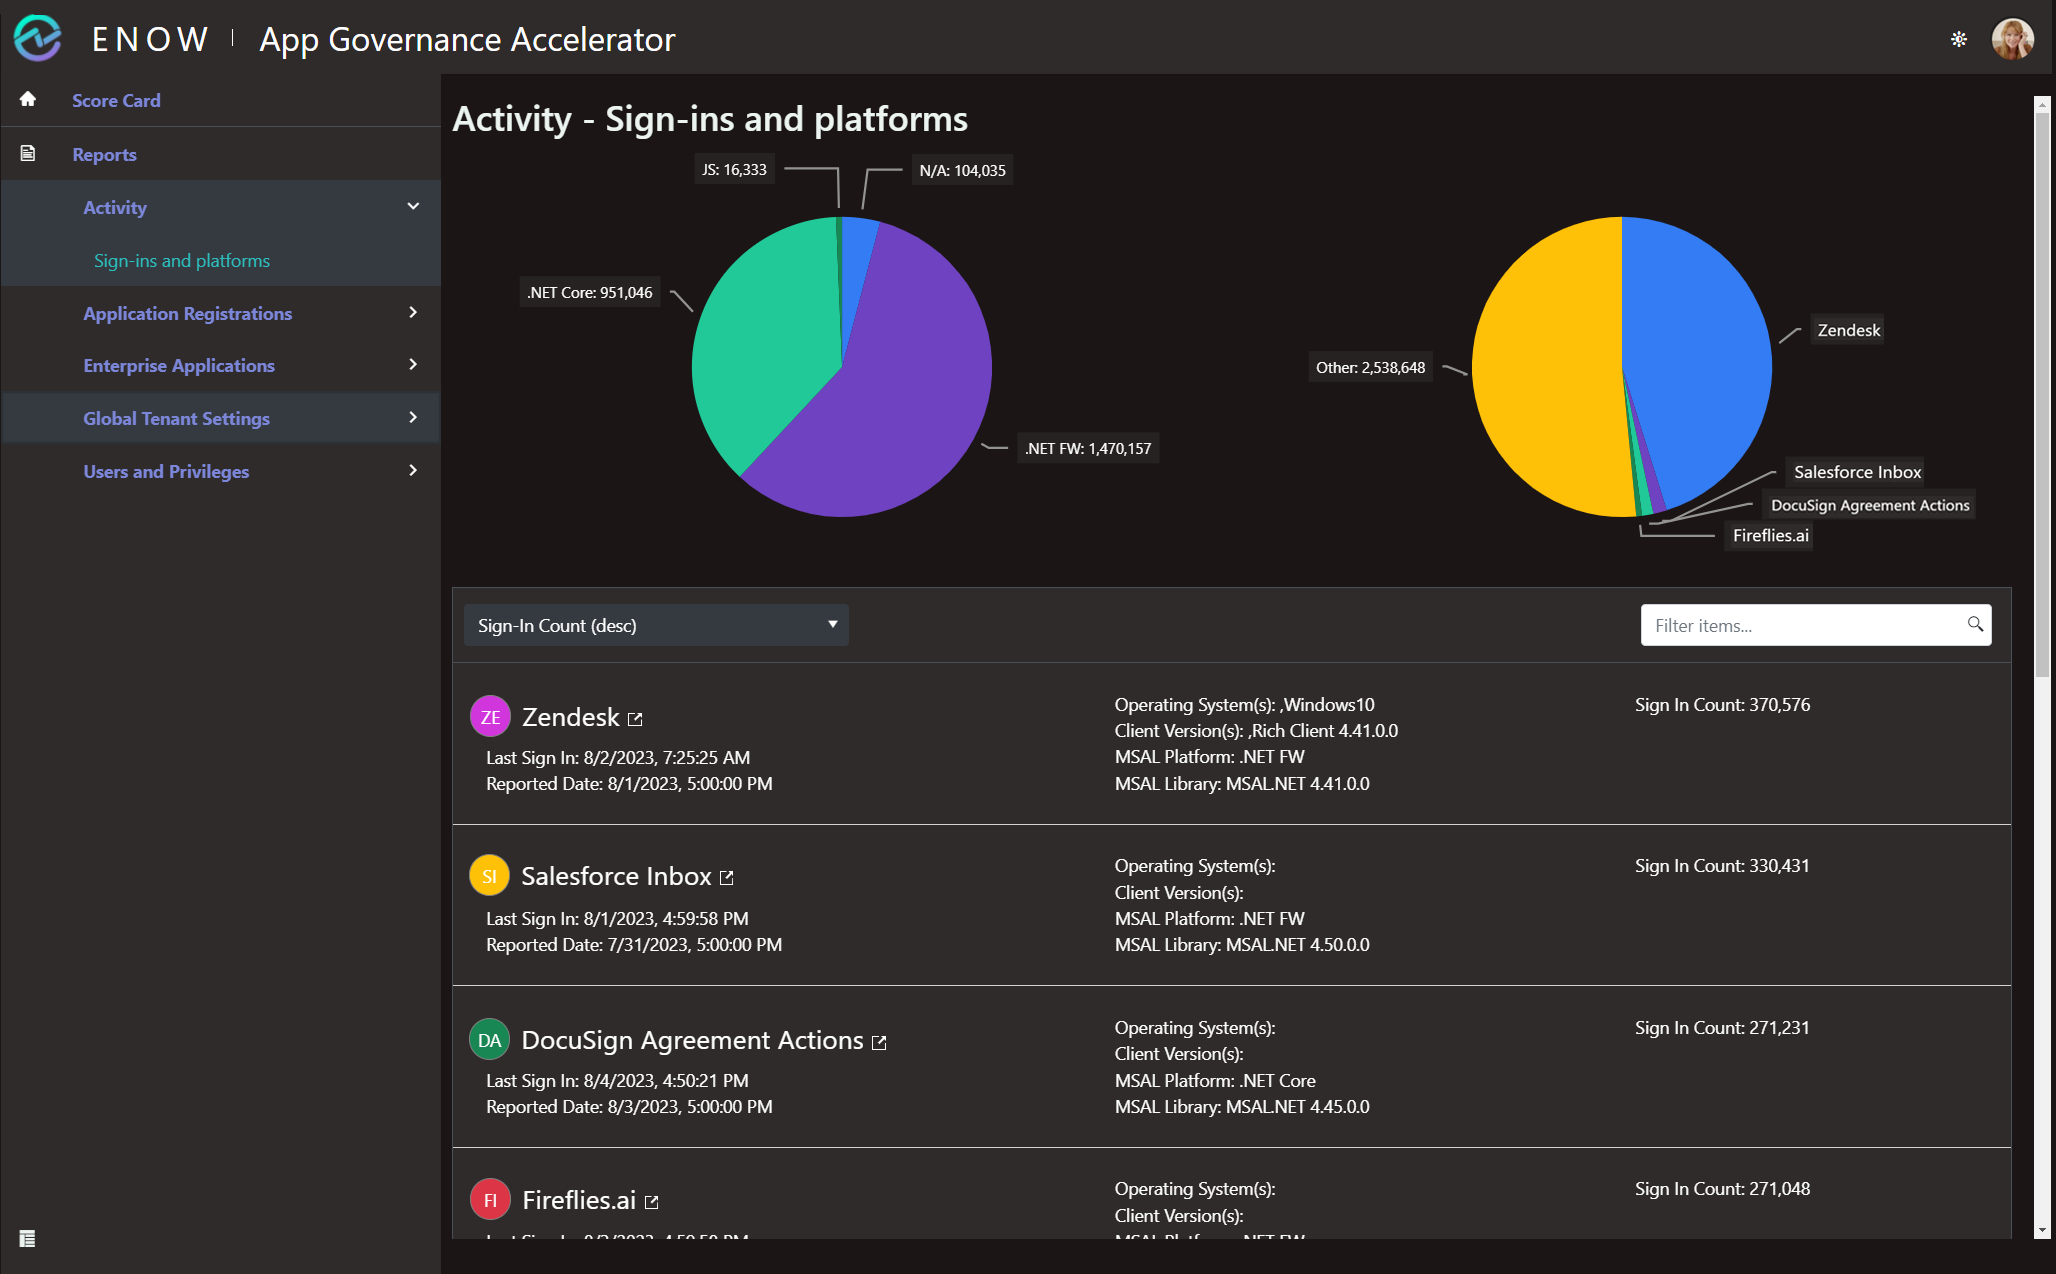 The Sign-ins and platforms report in the Activity section